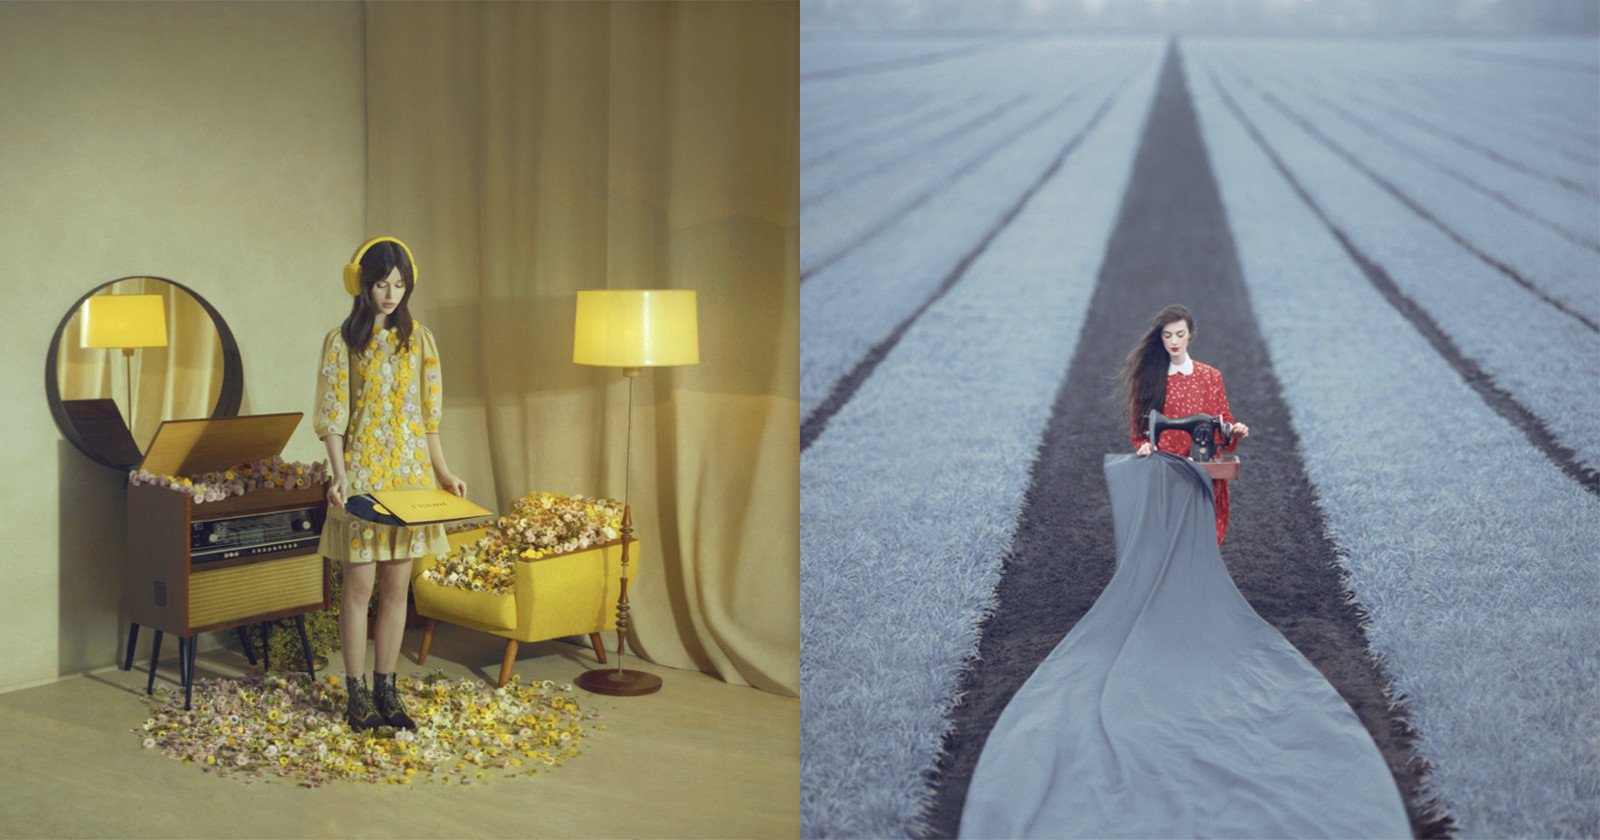 Photographer’s Surreal Images Look Like Snapshots Out of Dreams